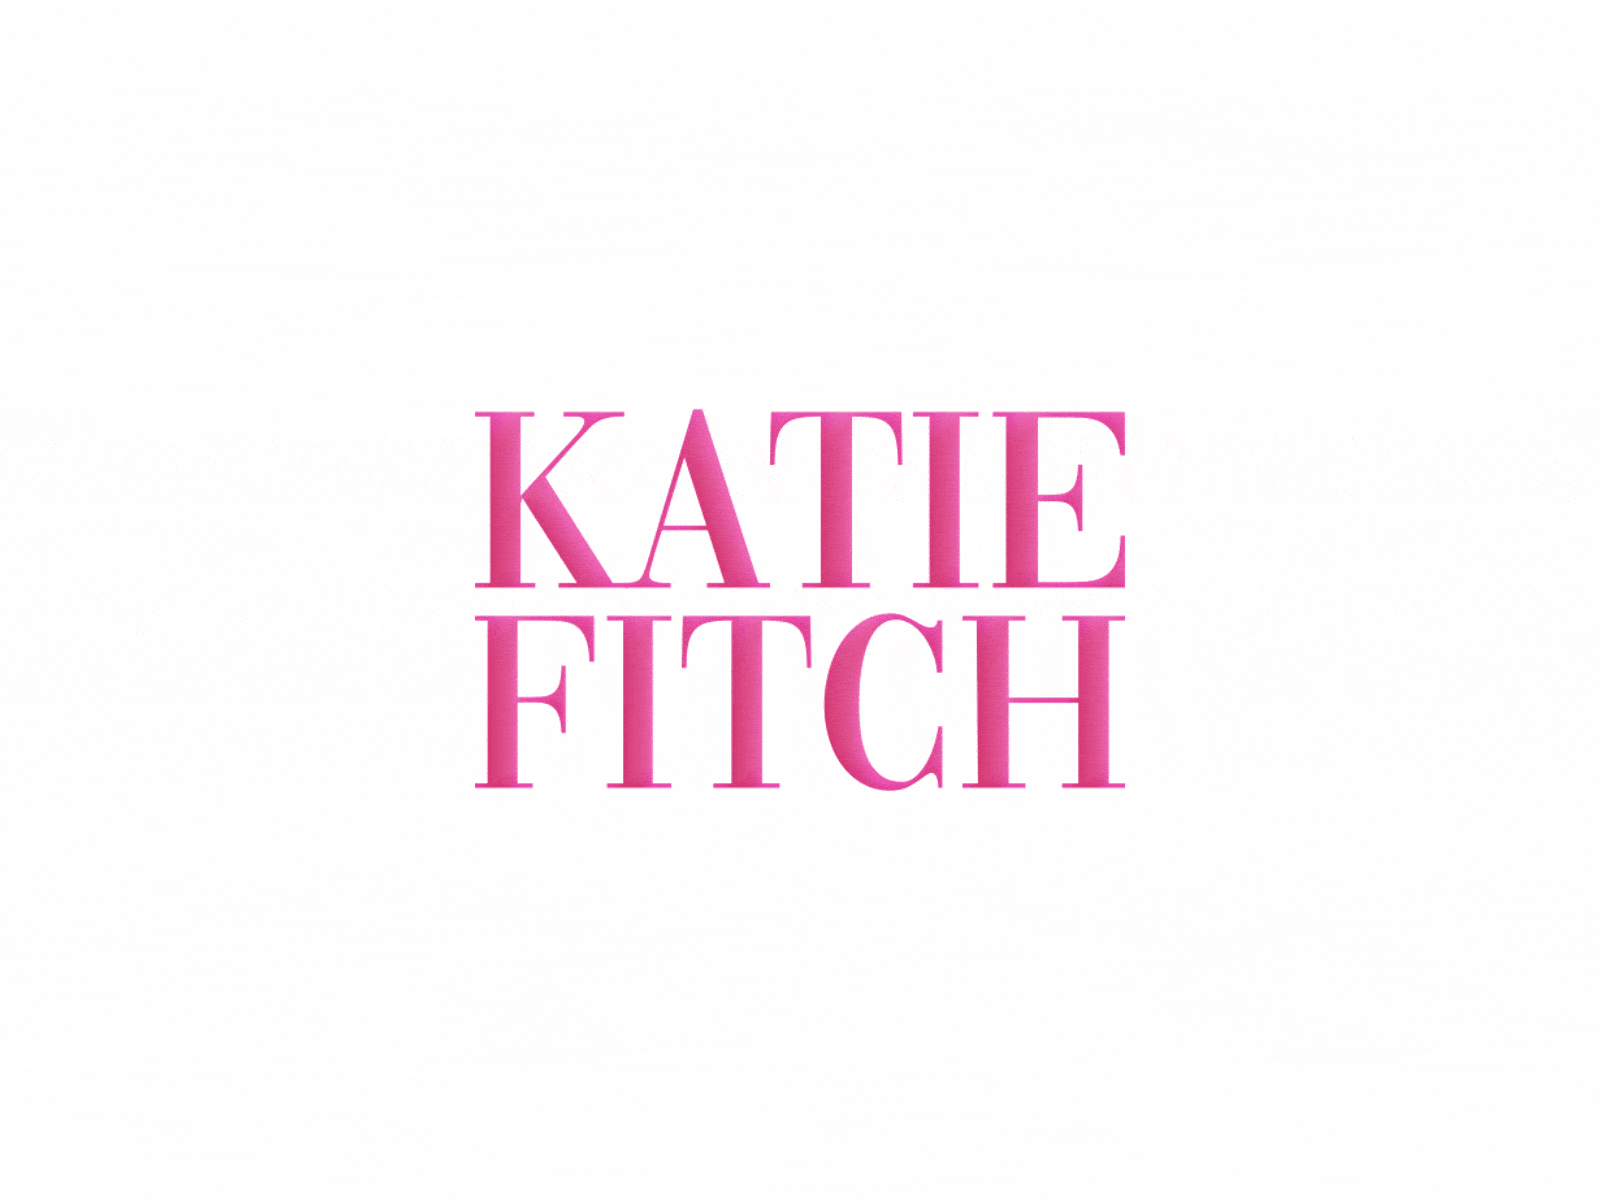 KATIE FITCH after effects animation design katie fitch motion skins typography